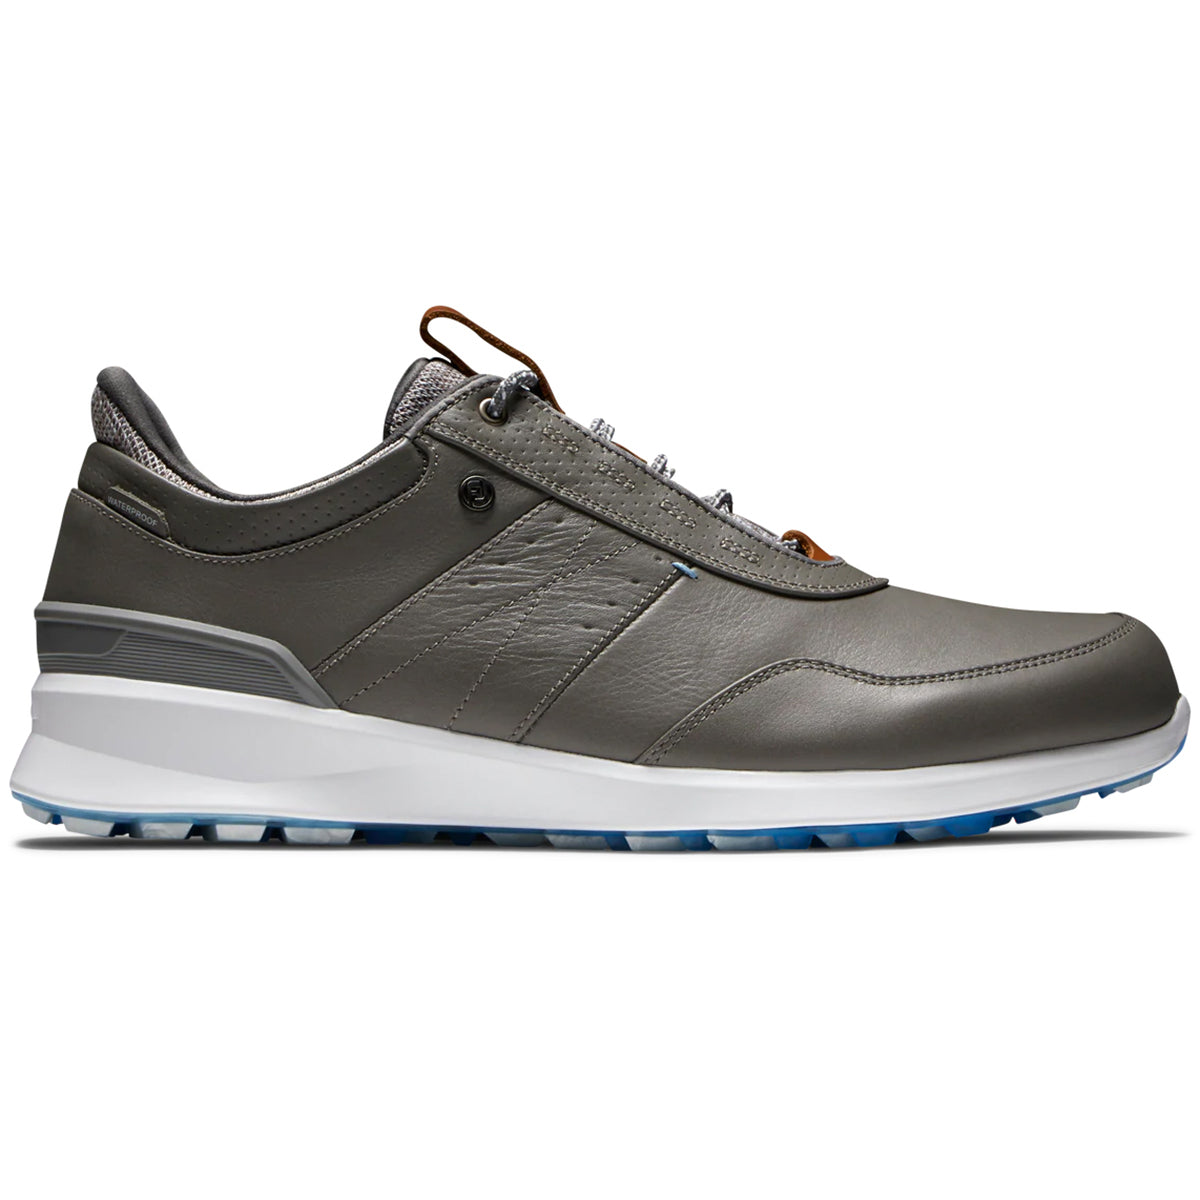 FootJoy Stratos Golf Shoes 50042 Grey | Function18 | Restrictedgs